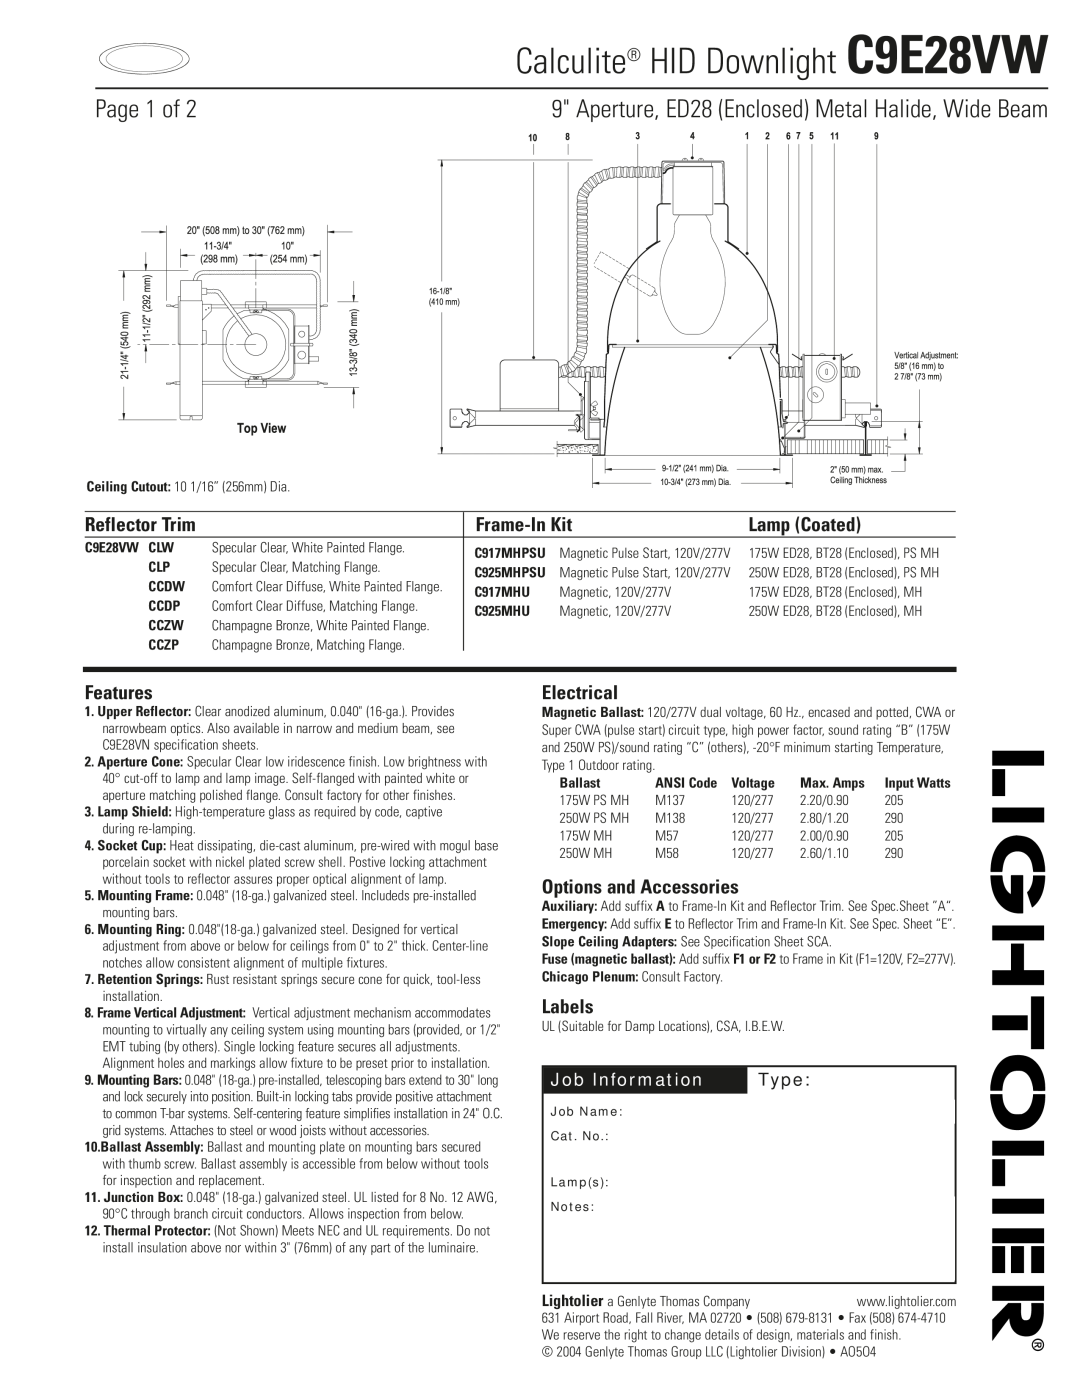 Lightolier specifications Calculite HID Downlight C9E28VW, Page 1 of, Aperture, ED28 Enclosed Metal Halide, Wide Beam 